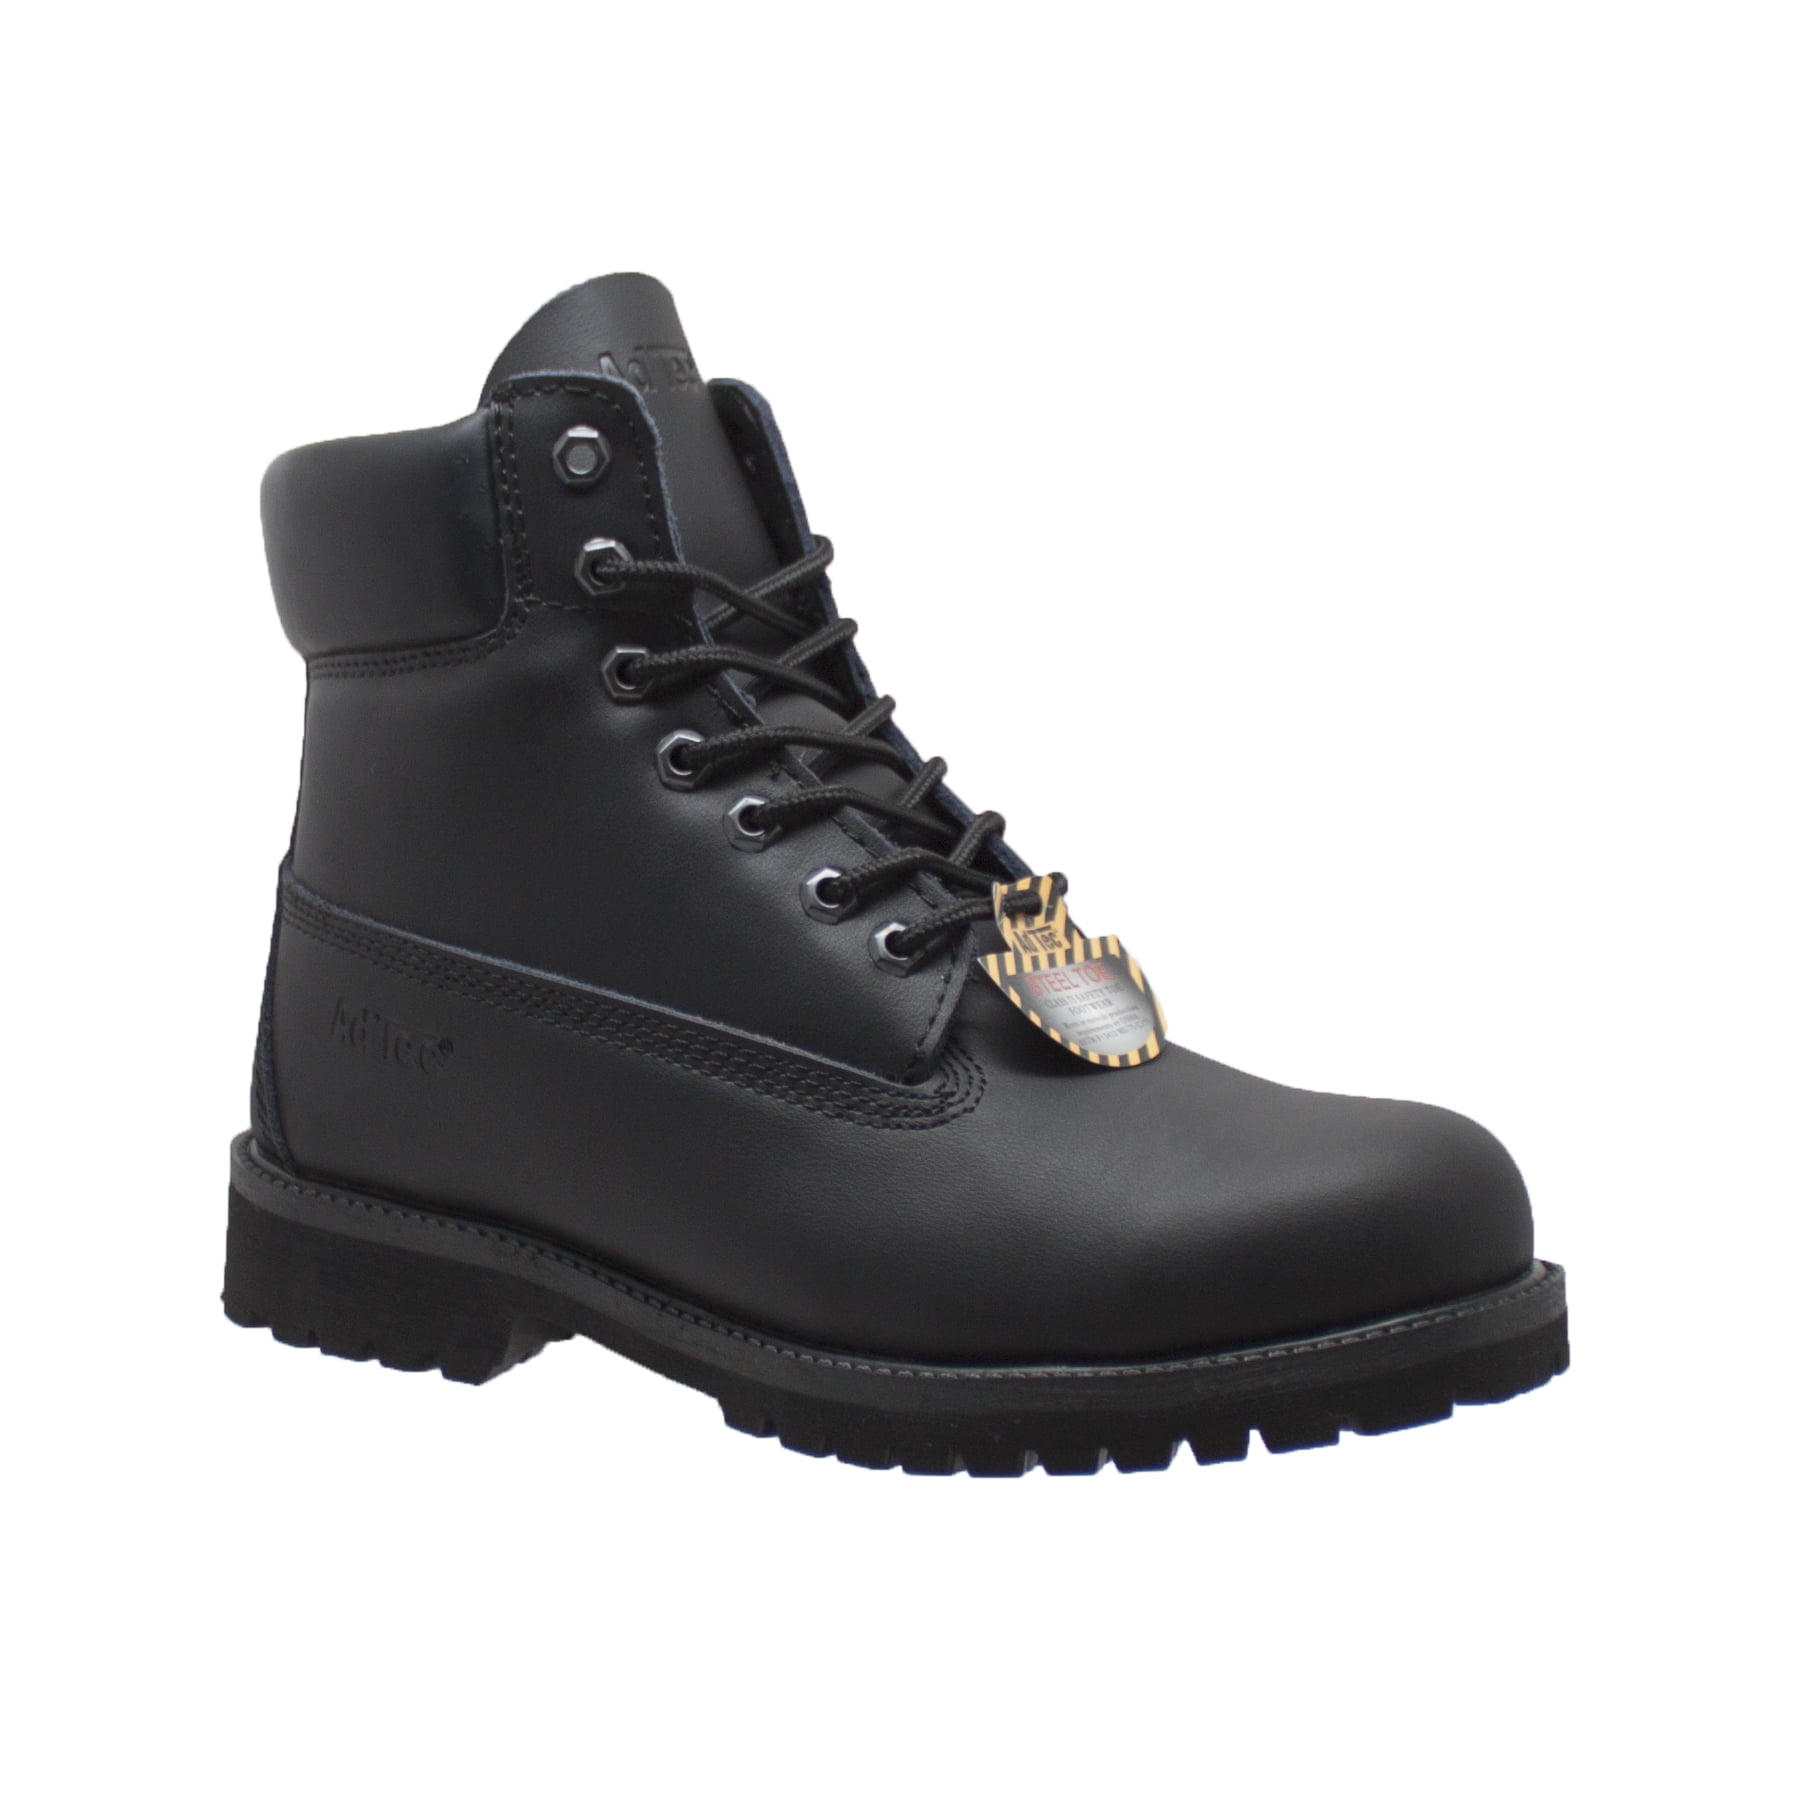 Mens Industrial Ventilated Ultra X Protection Safety Shoes Steel Toe Ankle Boots 